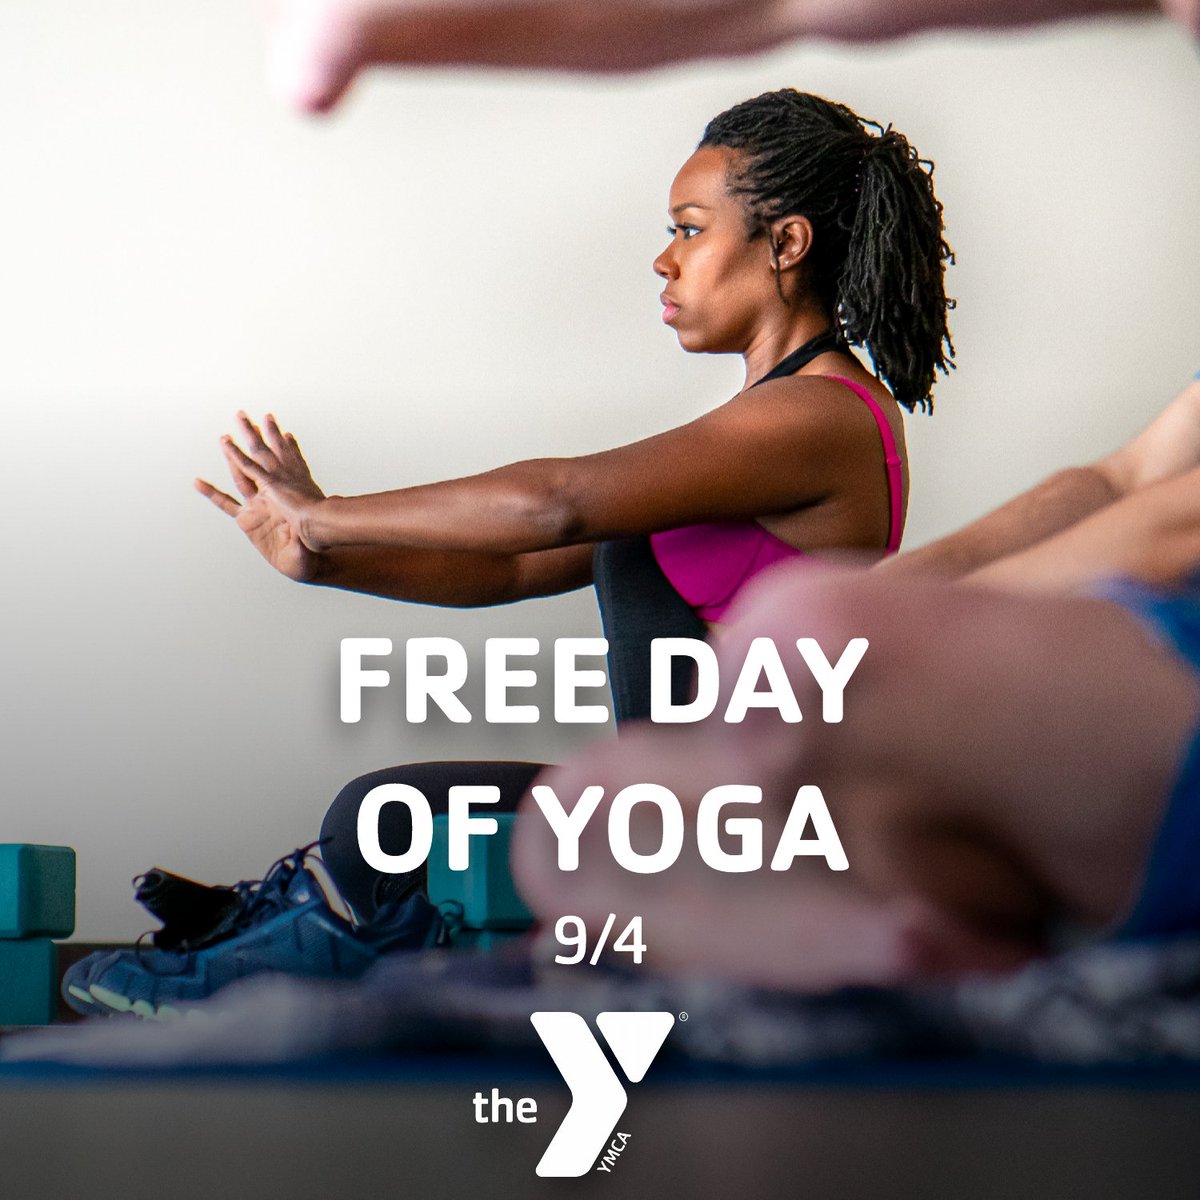 Celebrate the joys of yoga at any of our Y centers the Free Day of Yoga on 9/4 as the Greater Austin YMCA joins other local Yoga studios in this Austin tradition of providing free yoga for the entire community. bit.ly/3OE0qdX #FreeYogaDay #HealthandWellness #Yoga